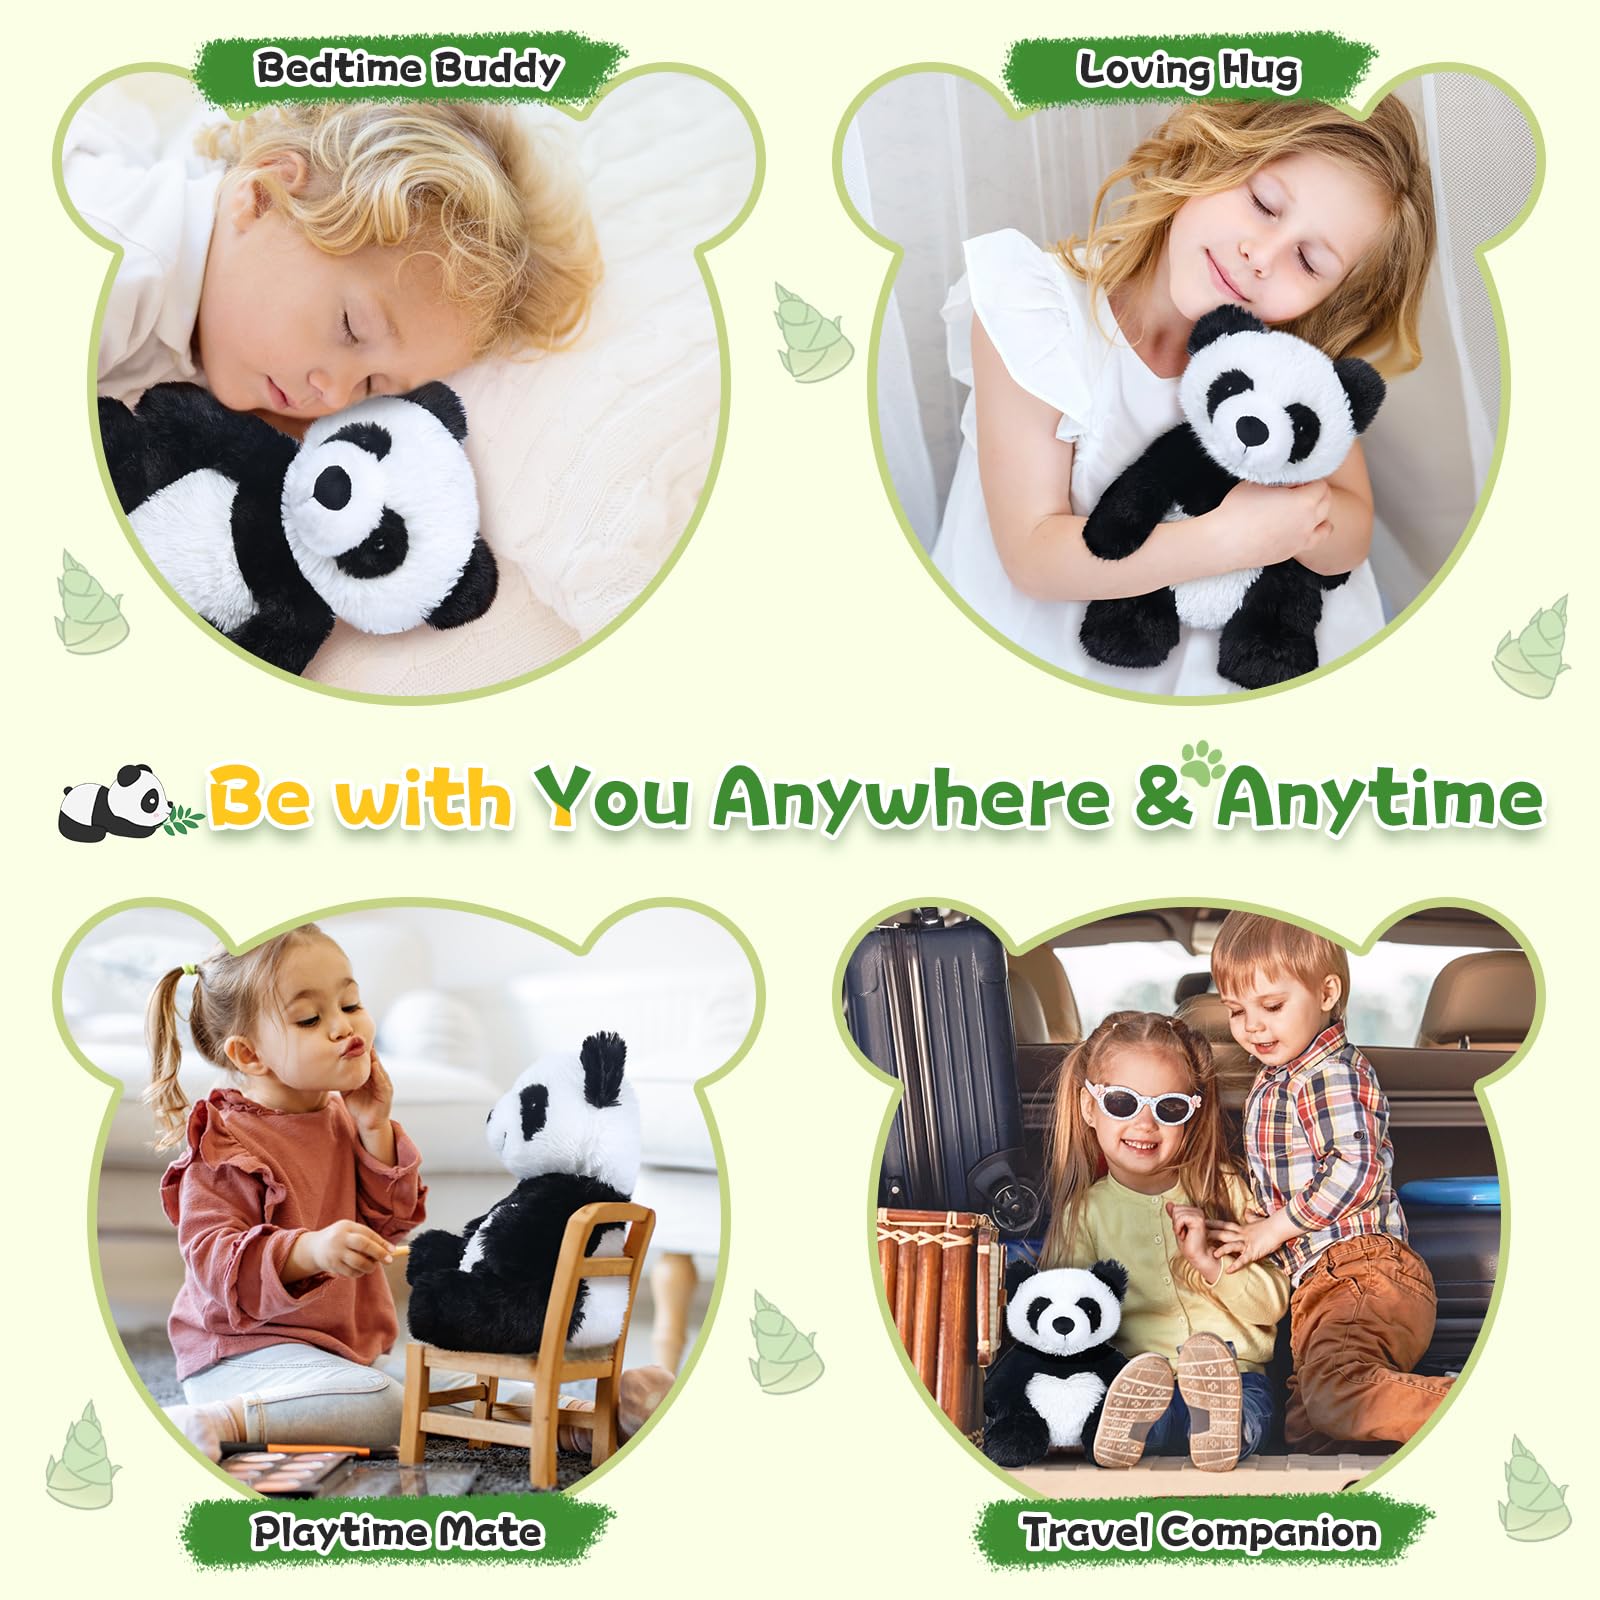 SuzziPals Warmable Panda Stuffed Animals, Microwave Heating Pads for Cramps, Anxiety & Stress Relief, Cuddly Panda Plushies with Lavender Scent, Heatable & Coolable Stuffed Panda Bear, Panda Gifts